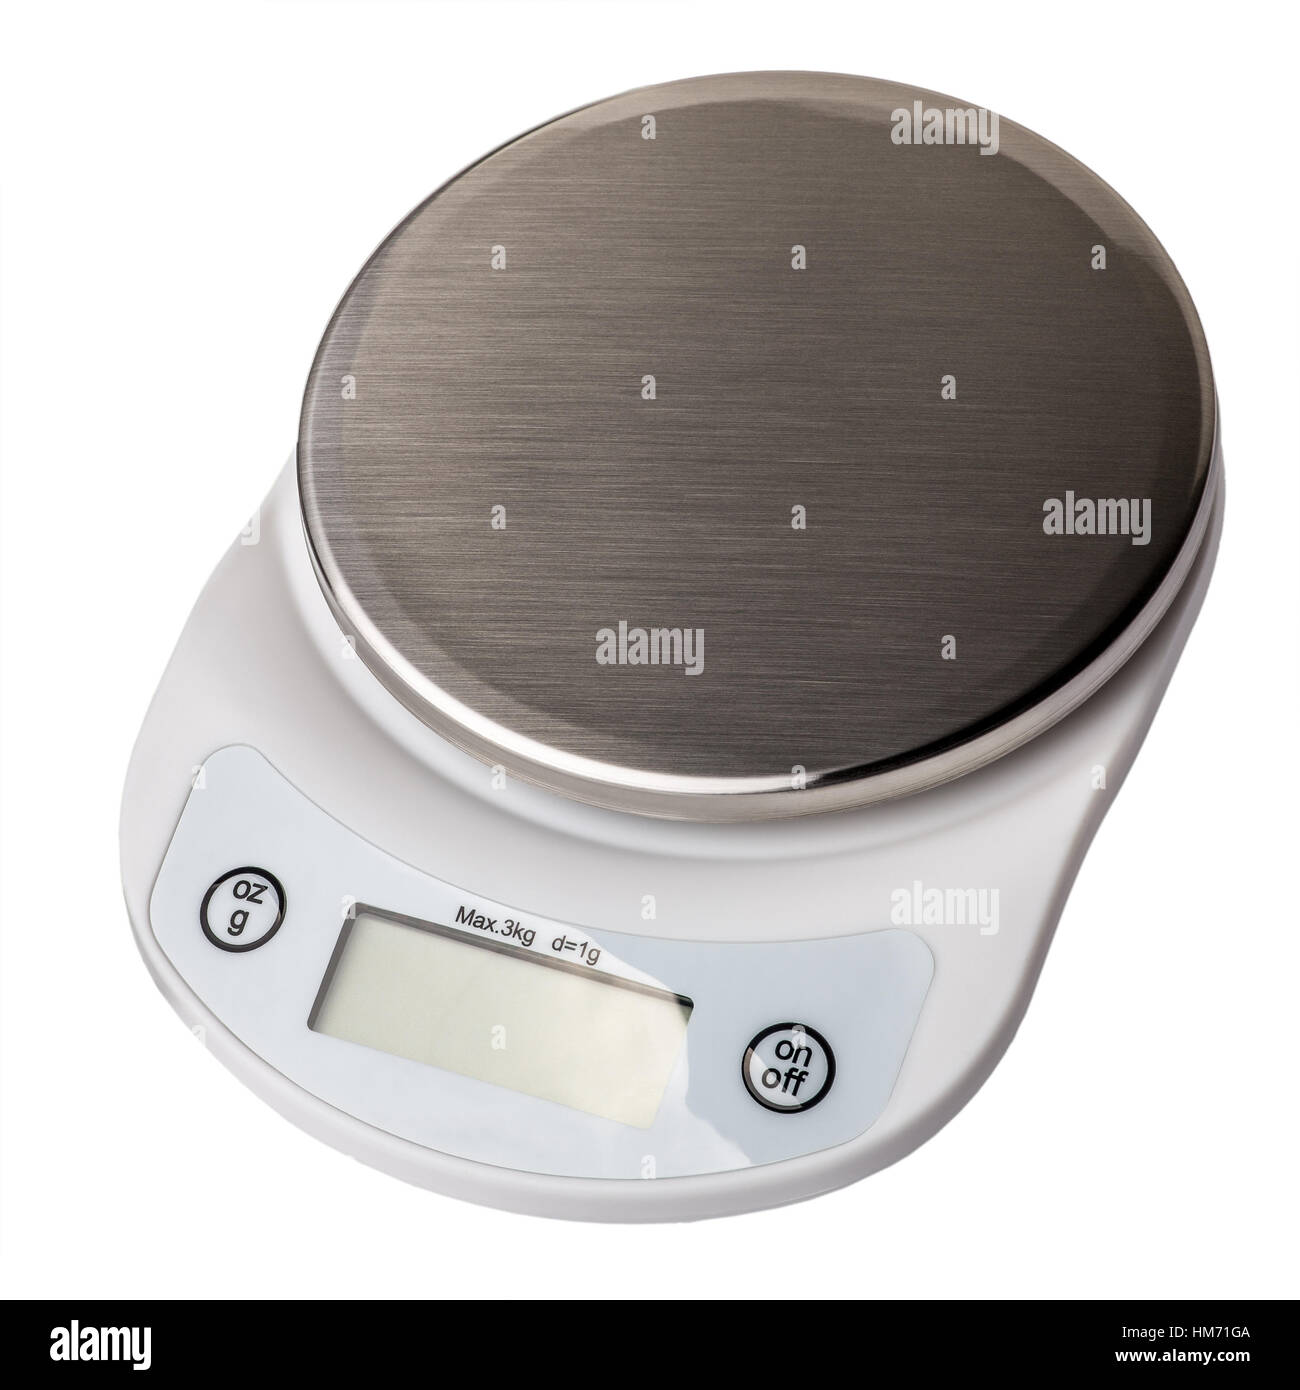 https://c8.alamy.com/comp/HM71GA/white-digital-kitchen-scales-are-isolated-on-a-white-background-top-HM71GA.jpg